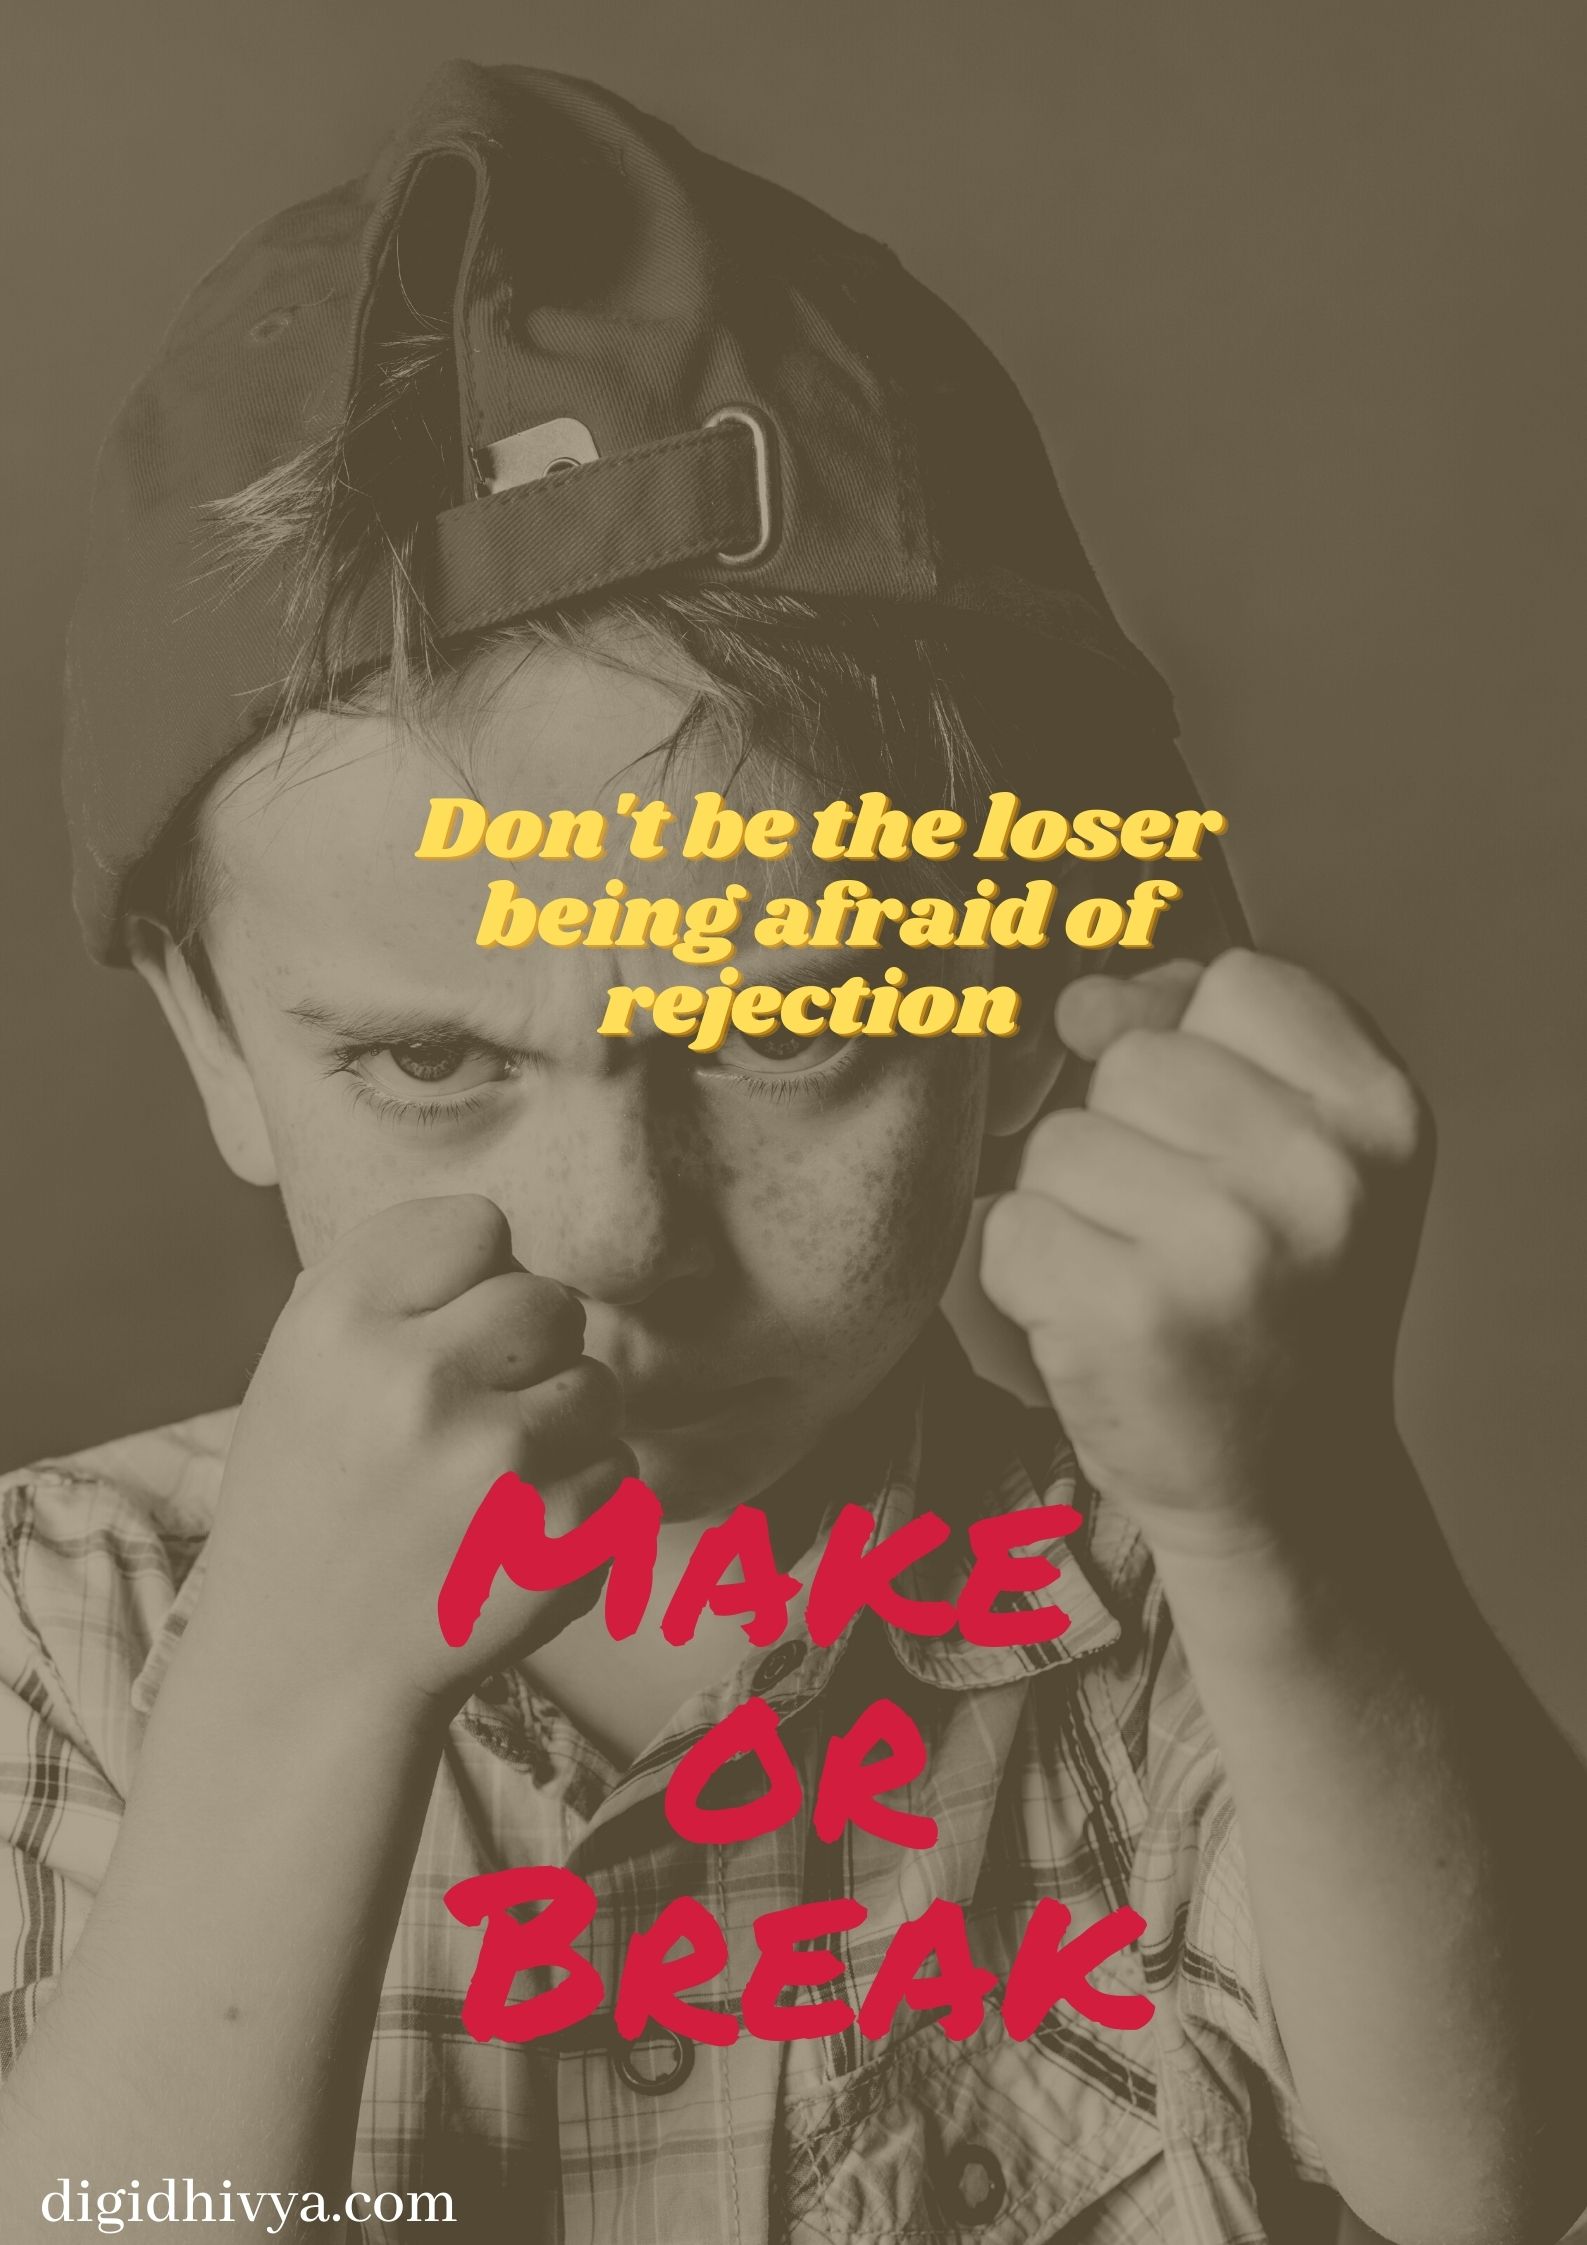 Don't afraid of rejections